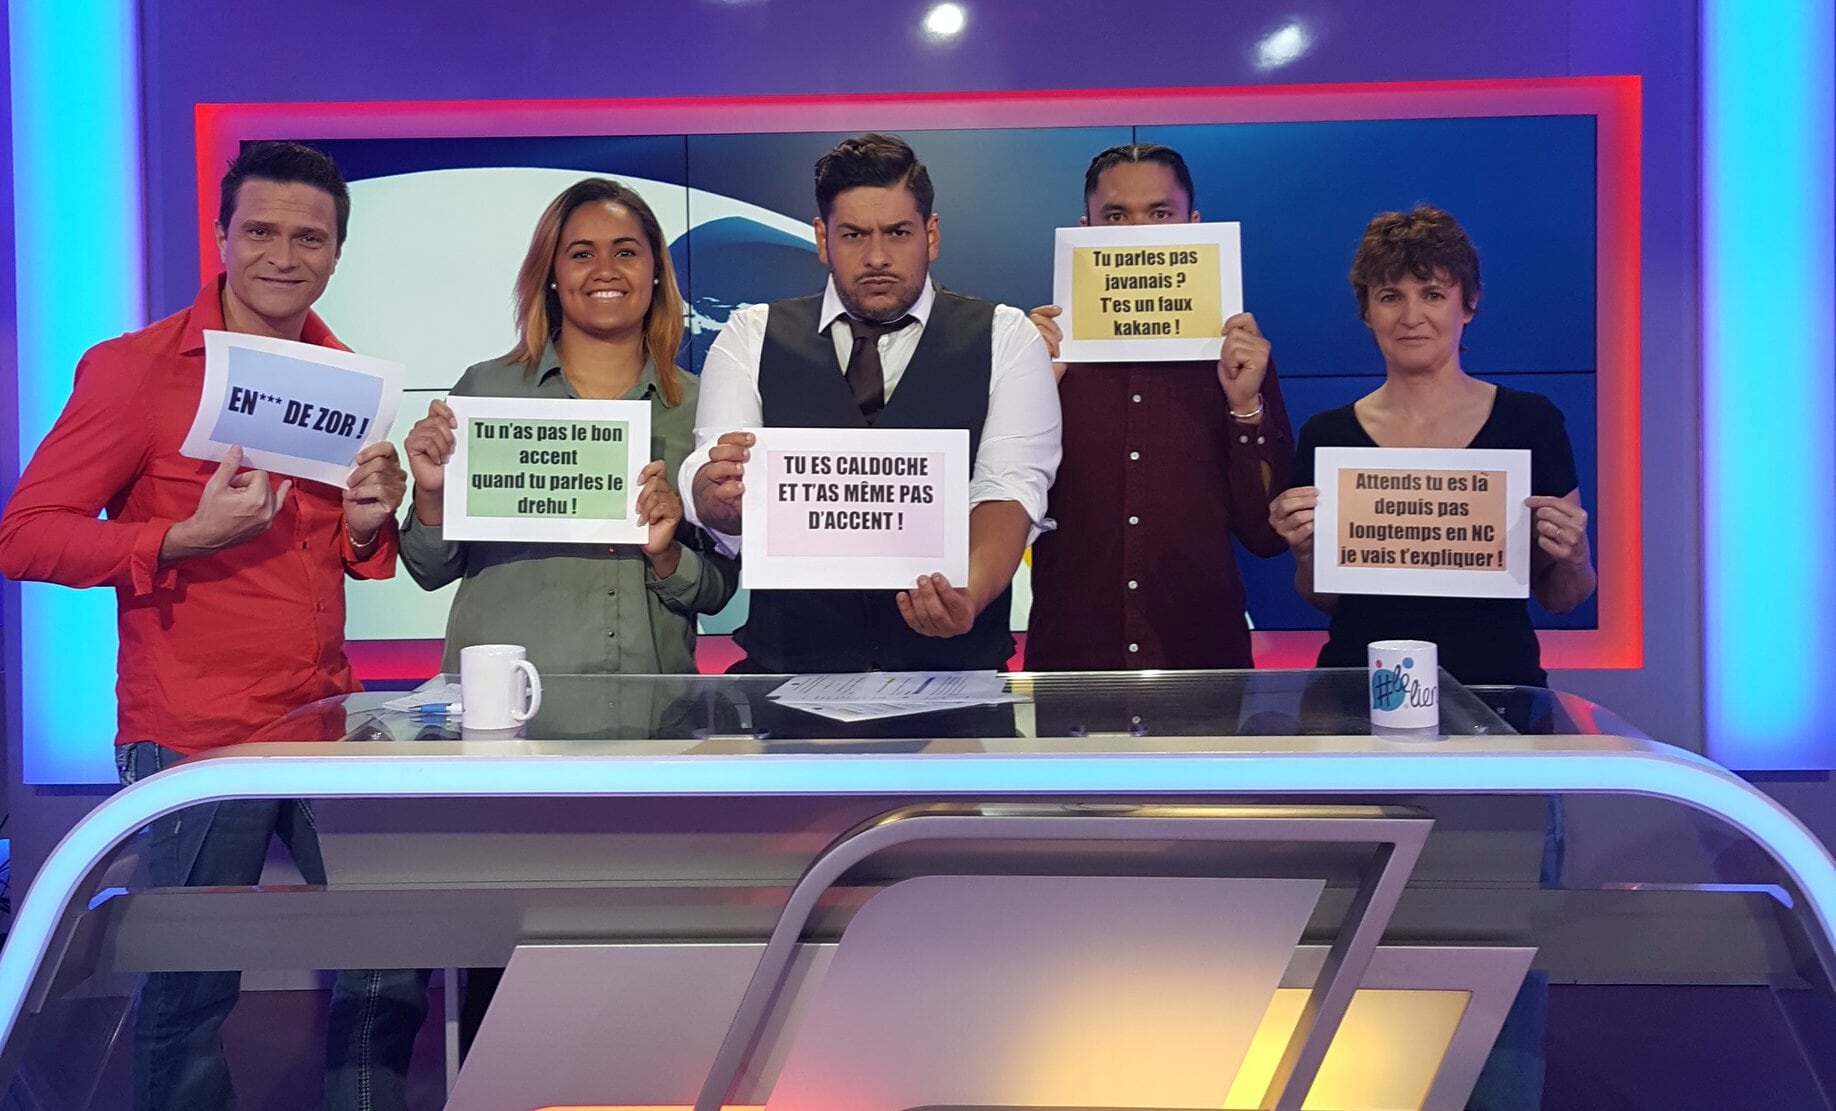 Figure 36: The presenters and participants of the TV show ‘#lelien’ share linguistic their micro-aggressions. Translations of the transcripts they are holding (from left to right) 1) ‘****(insult) ‘ZOR’ (comes from ‘zoreille’, slang for ‘white’) 2) ‘You don't have the right accent when you speak drehu’ 3) ‘You're Caldoche and you don't even have the accent!’ (‘Caldoche’ is slang for native-born European, French settlers and their descendants established in NC) 4) ‘You don't speak Javanese? You're a fake “kakane”!’ 5) ‘Wait a sec, you’ve been in NC for how long? Let me teach you how it works…’